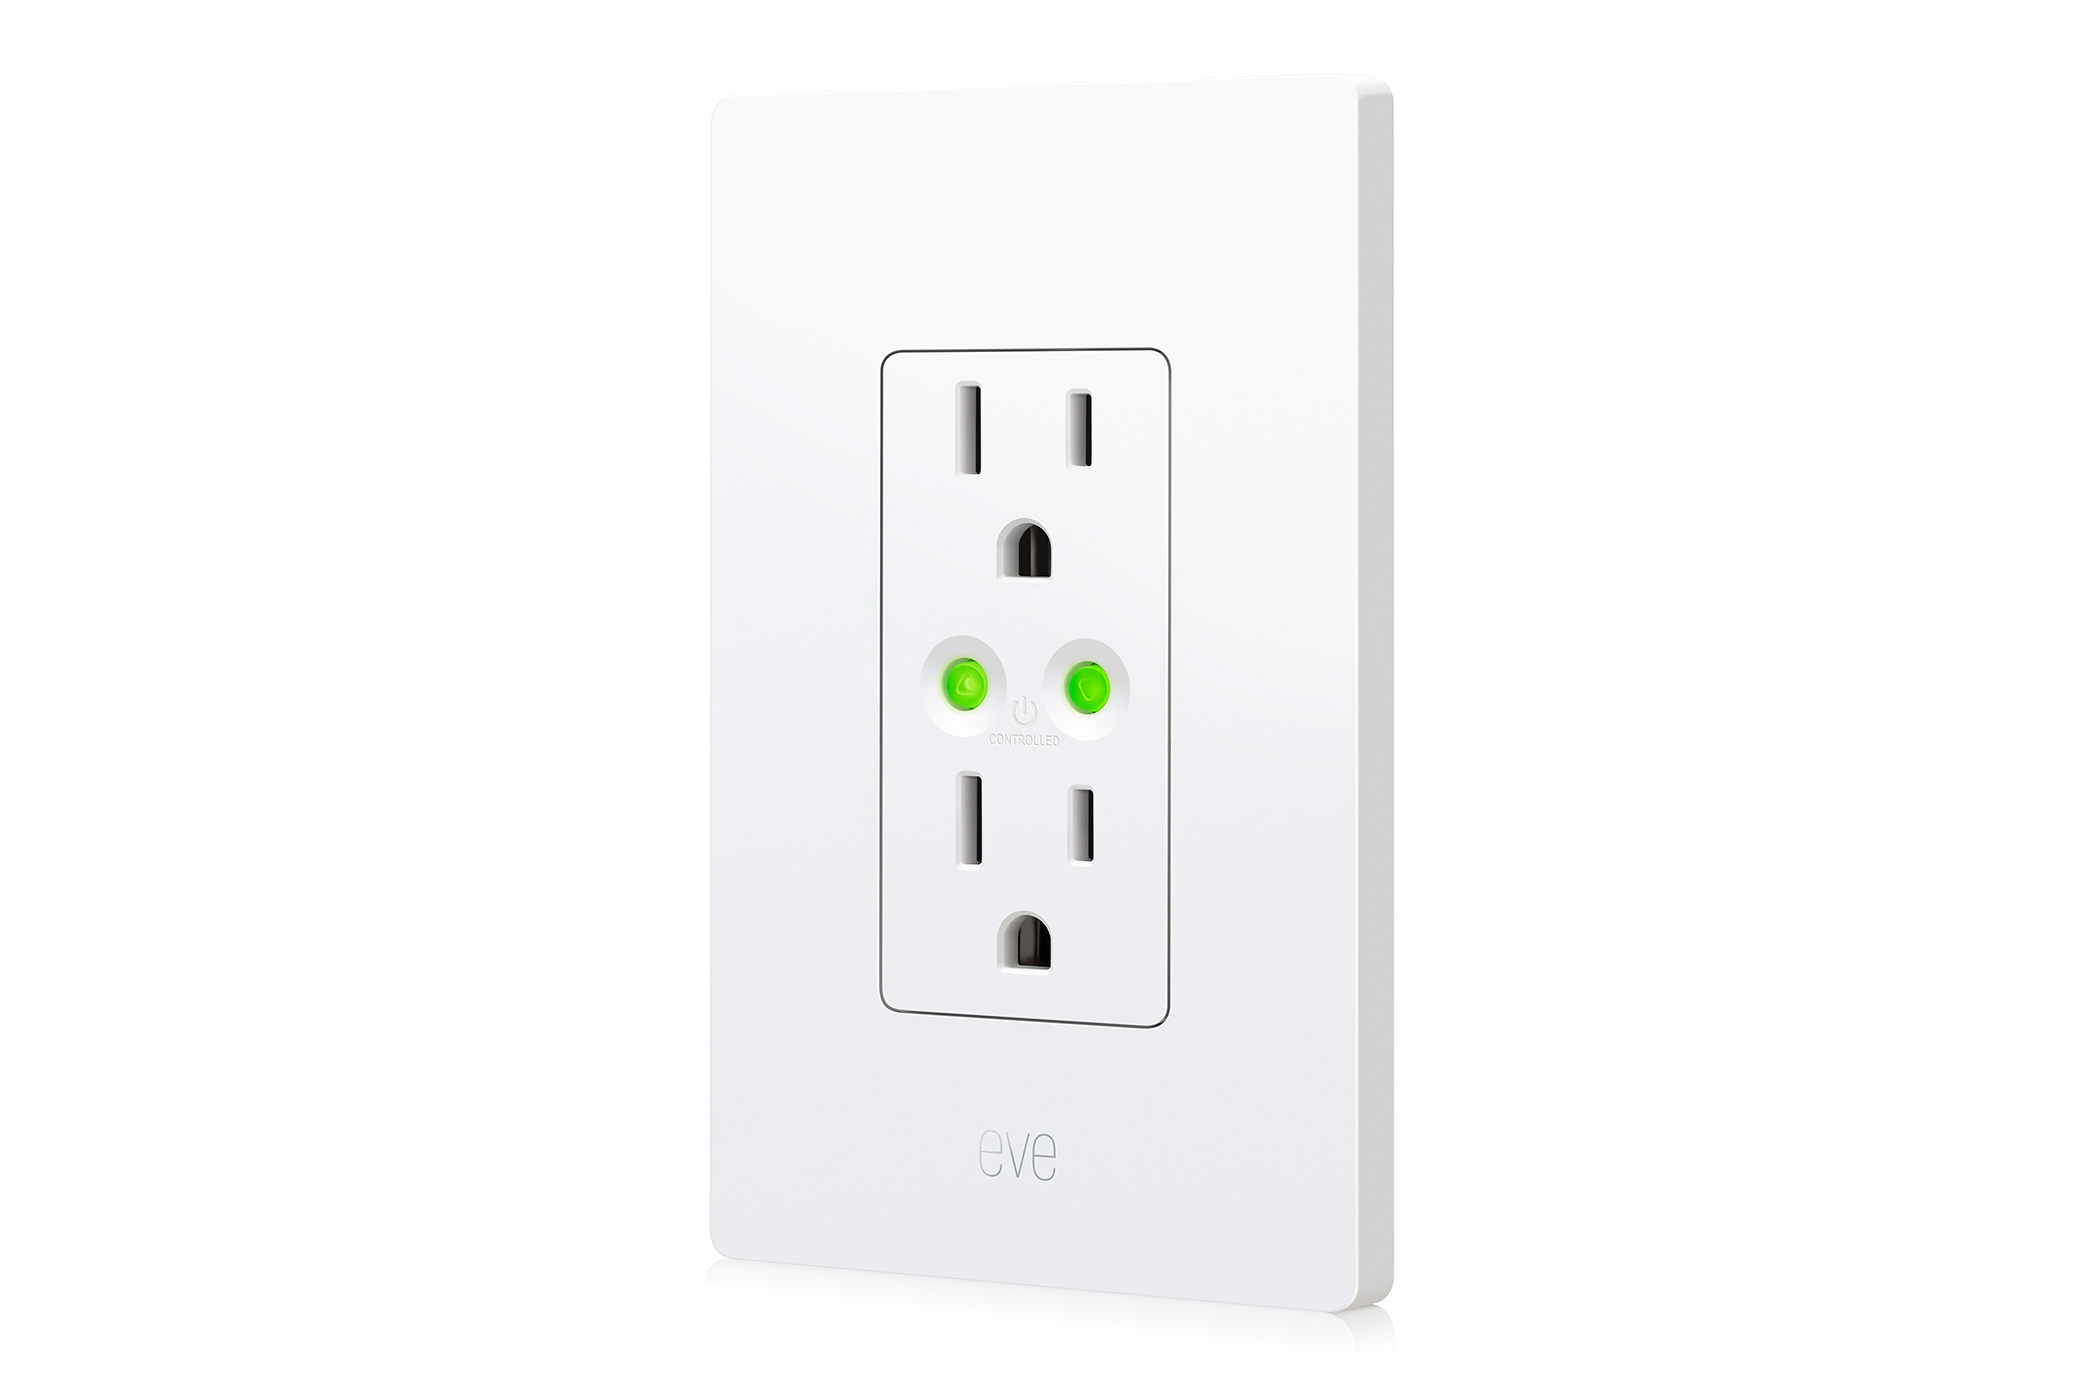 Eve's New Energy-Monitoring Smart Outlet Is the First to Have Matter